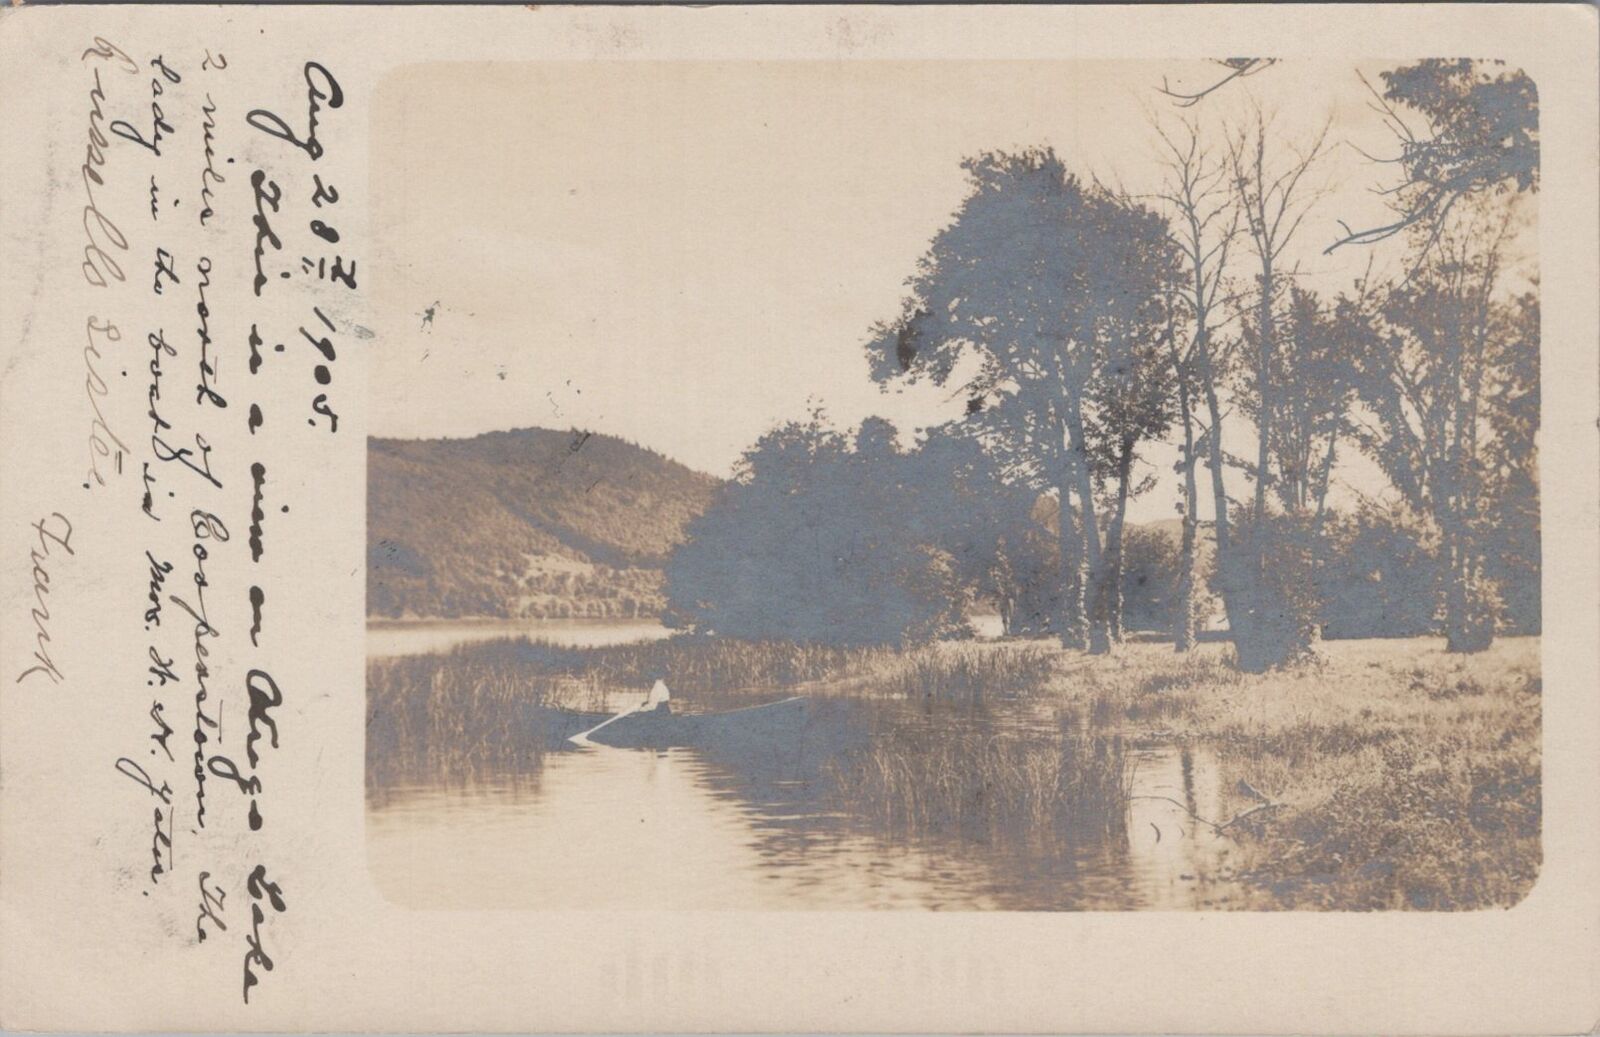 Boat on the Lake North of Cooperstown Johnstown NY 1908 RPPC Photo Postcard